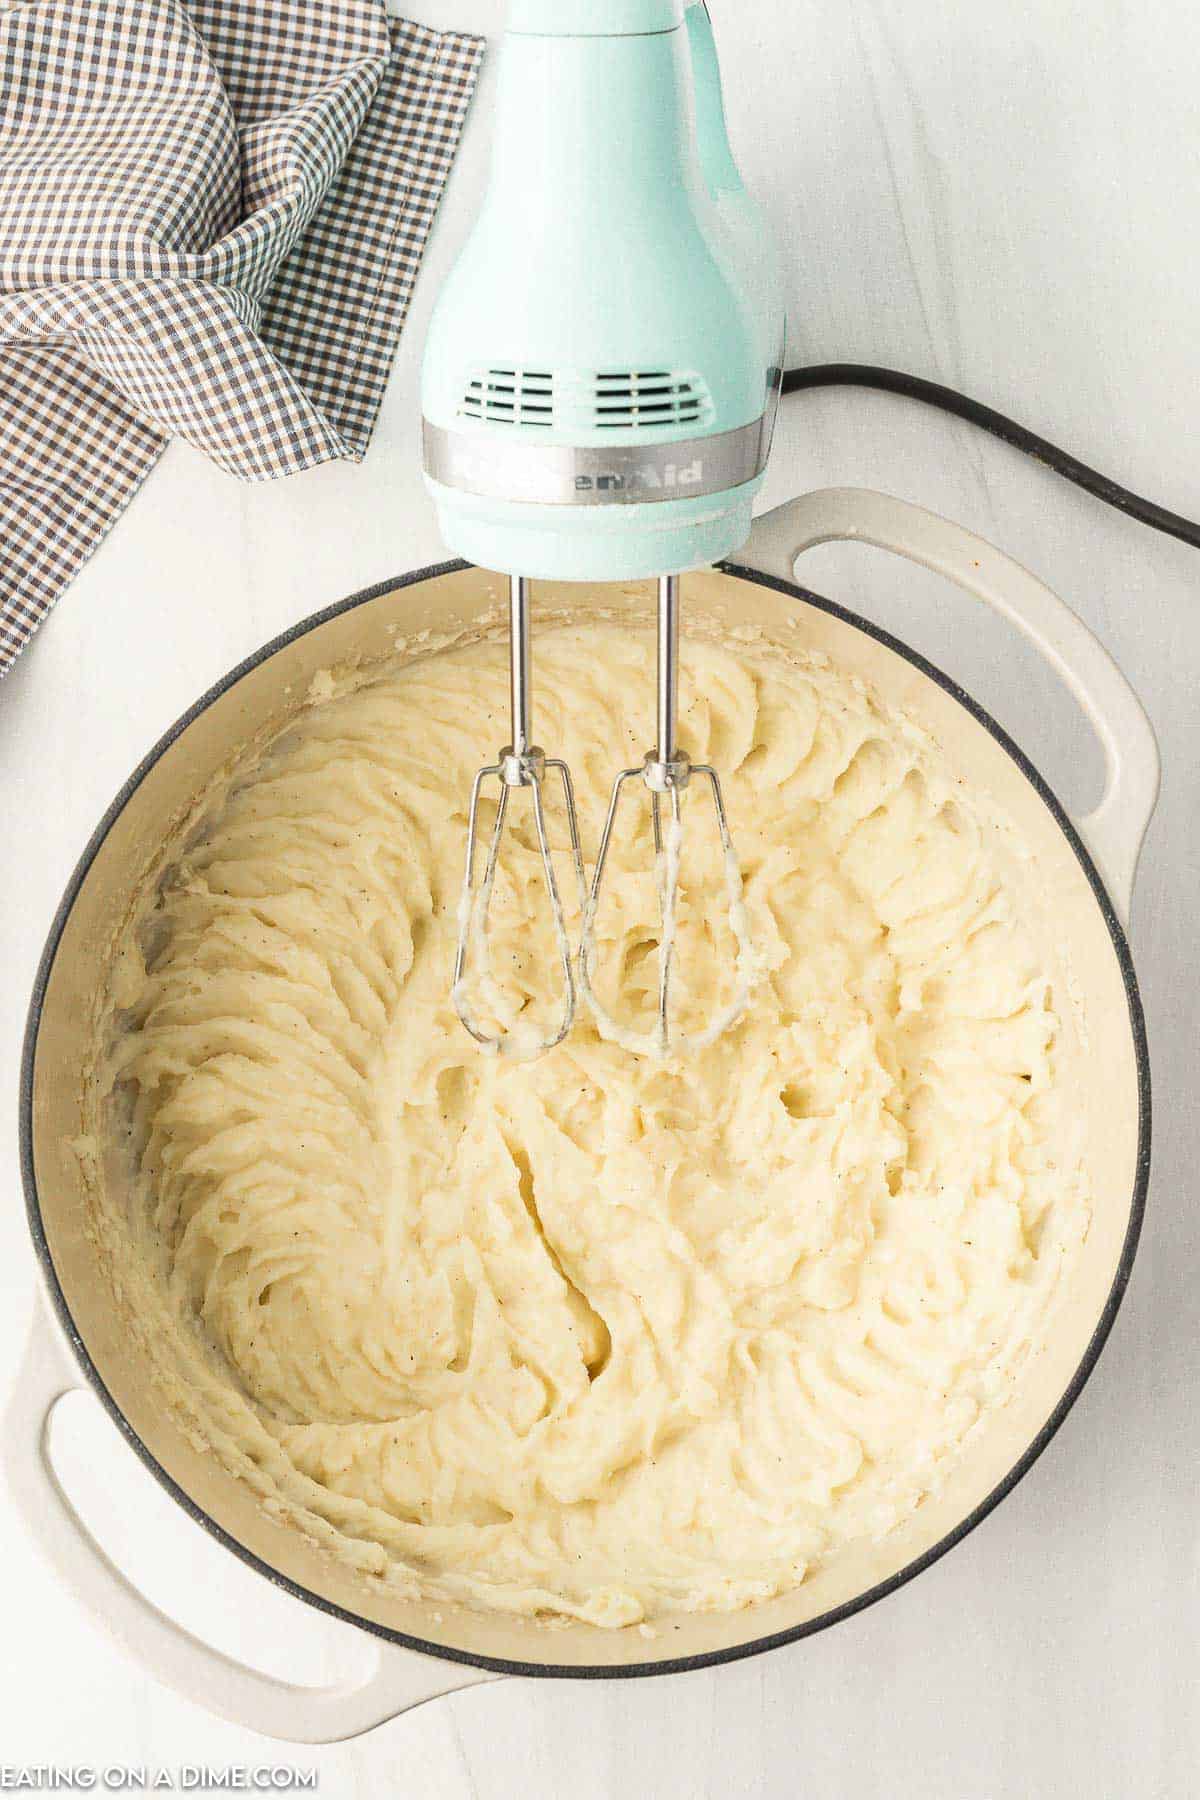 Mashing potatoes in a large pot with a hand mixer